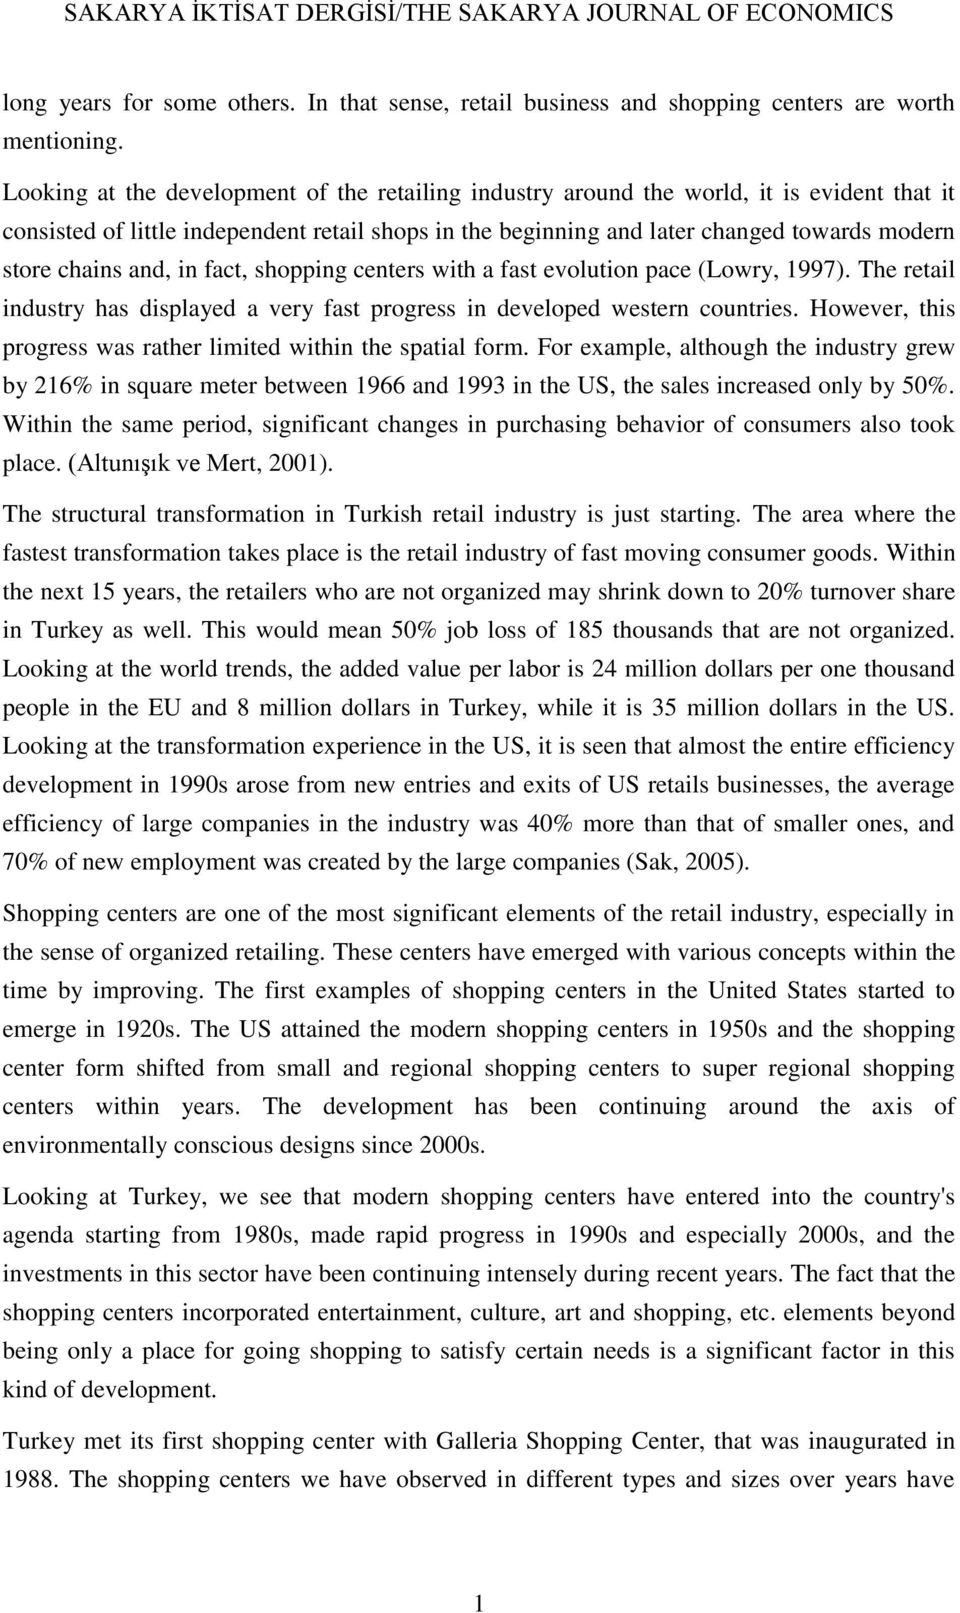 chains and, in fact, shopping centers with a fast evolution pace (Lowry, 1997). The retail industry has displayed a very fast progress in developed western countries.